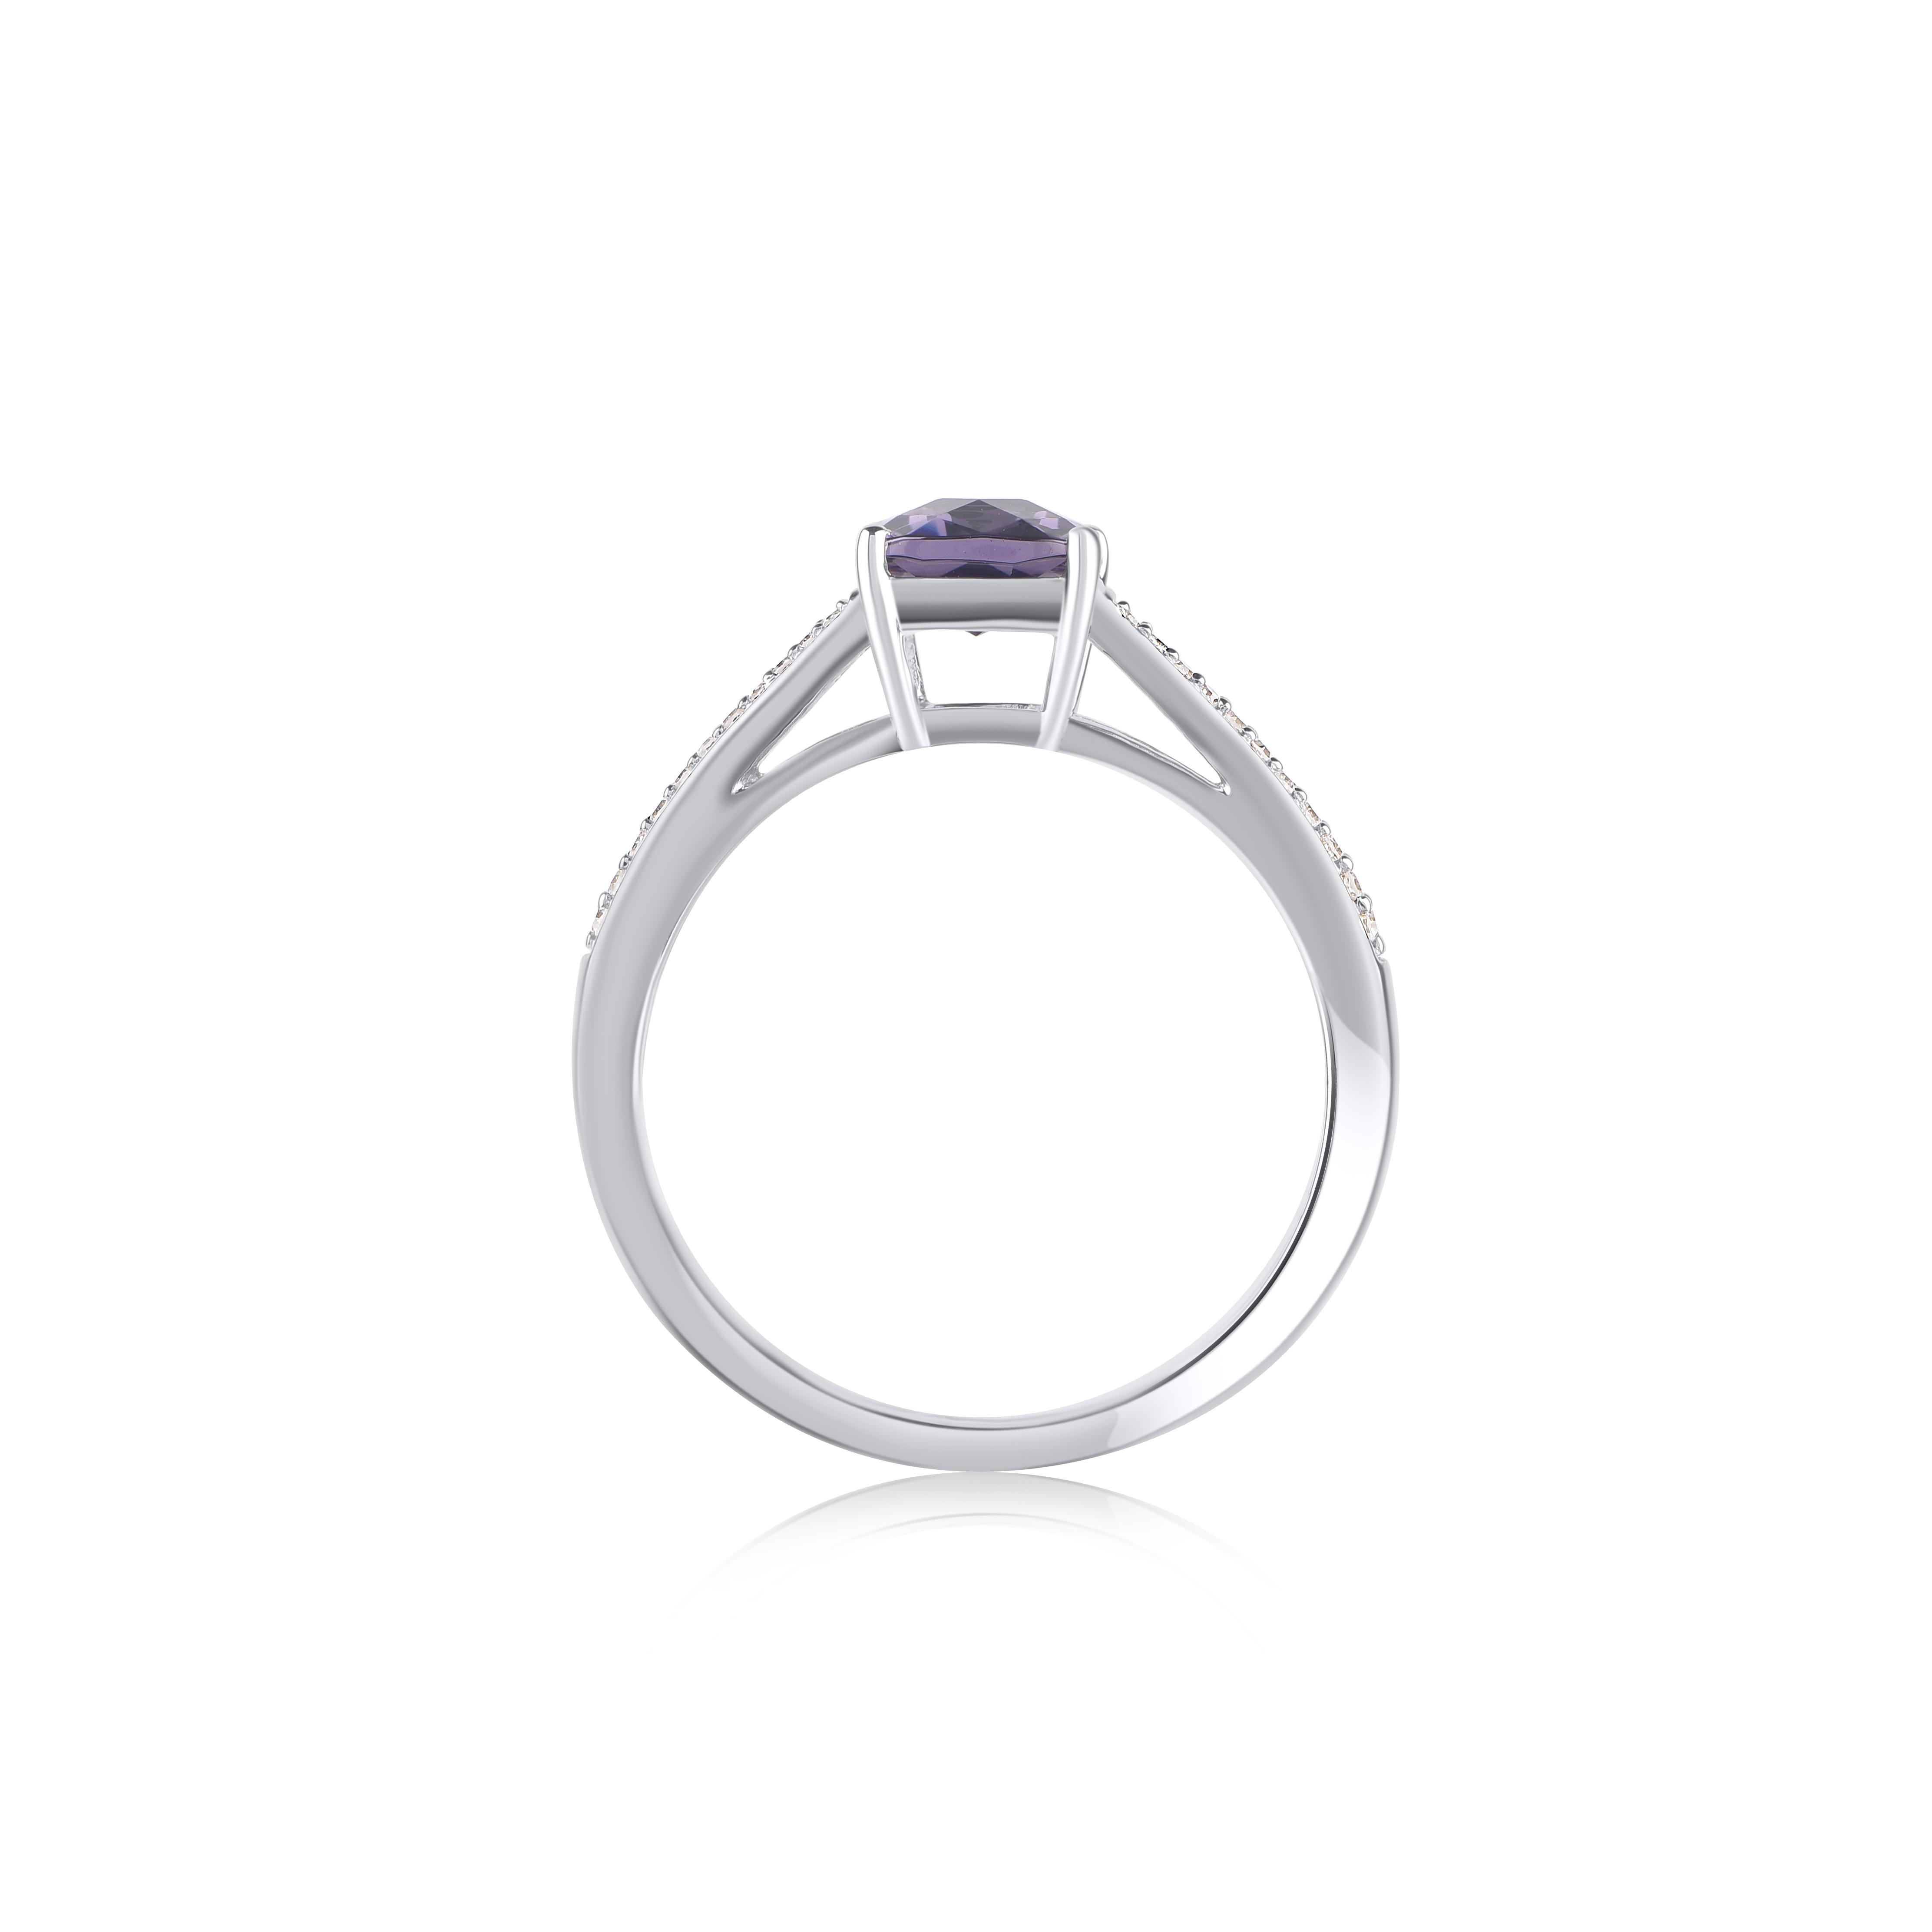 TJD 0.85 Carat Round & Cushion Cut Amethyst 14 Karat White Gold Solitaire Ring In New Condition For Sale In New York, NY